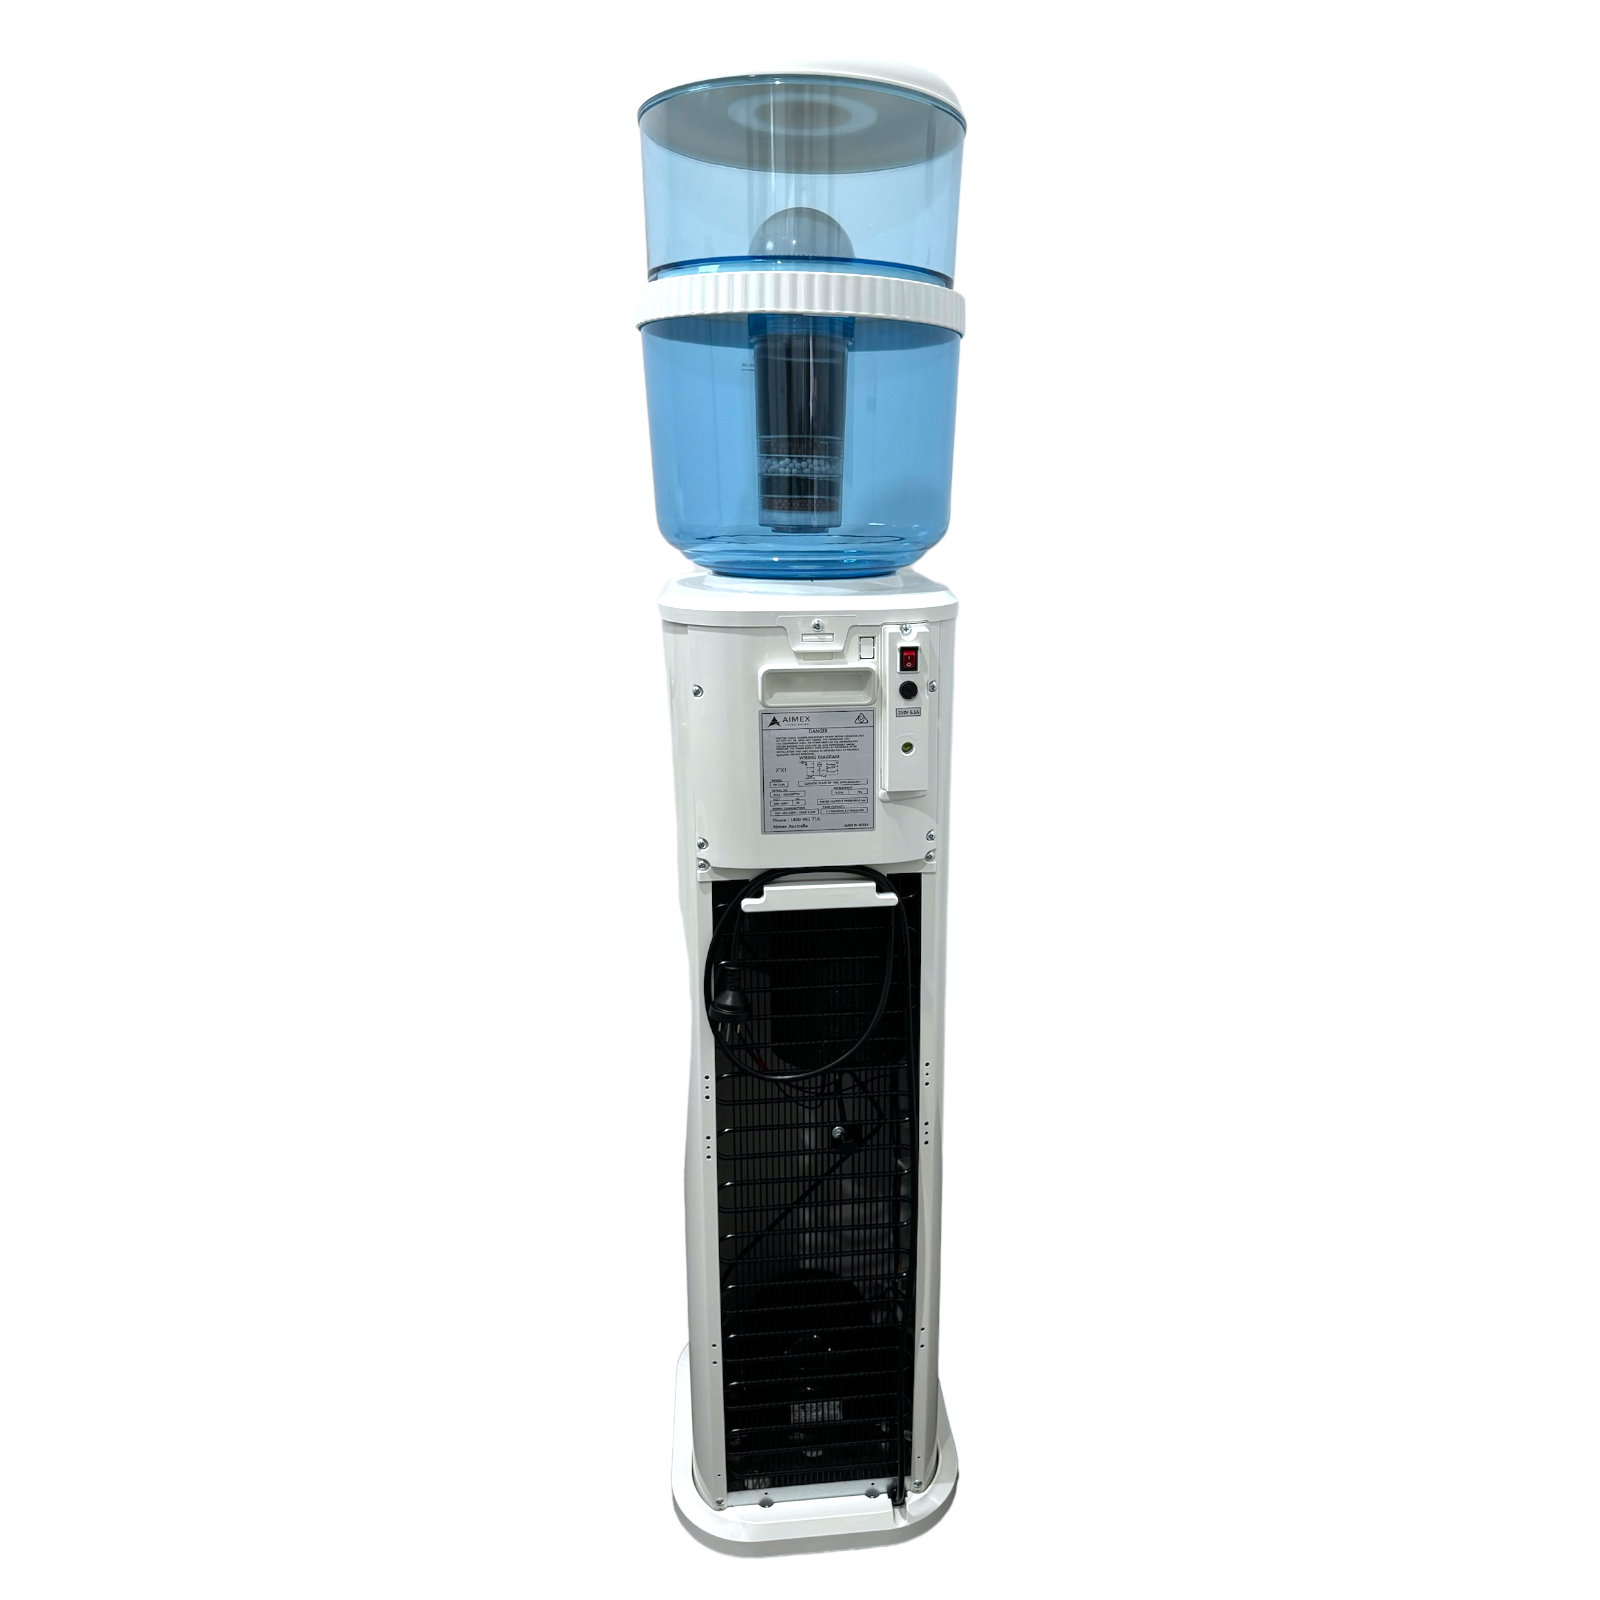 White Hot and Cold Free Standing Water Dispenser w/ Filter, LG Compressor